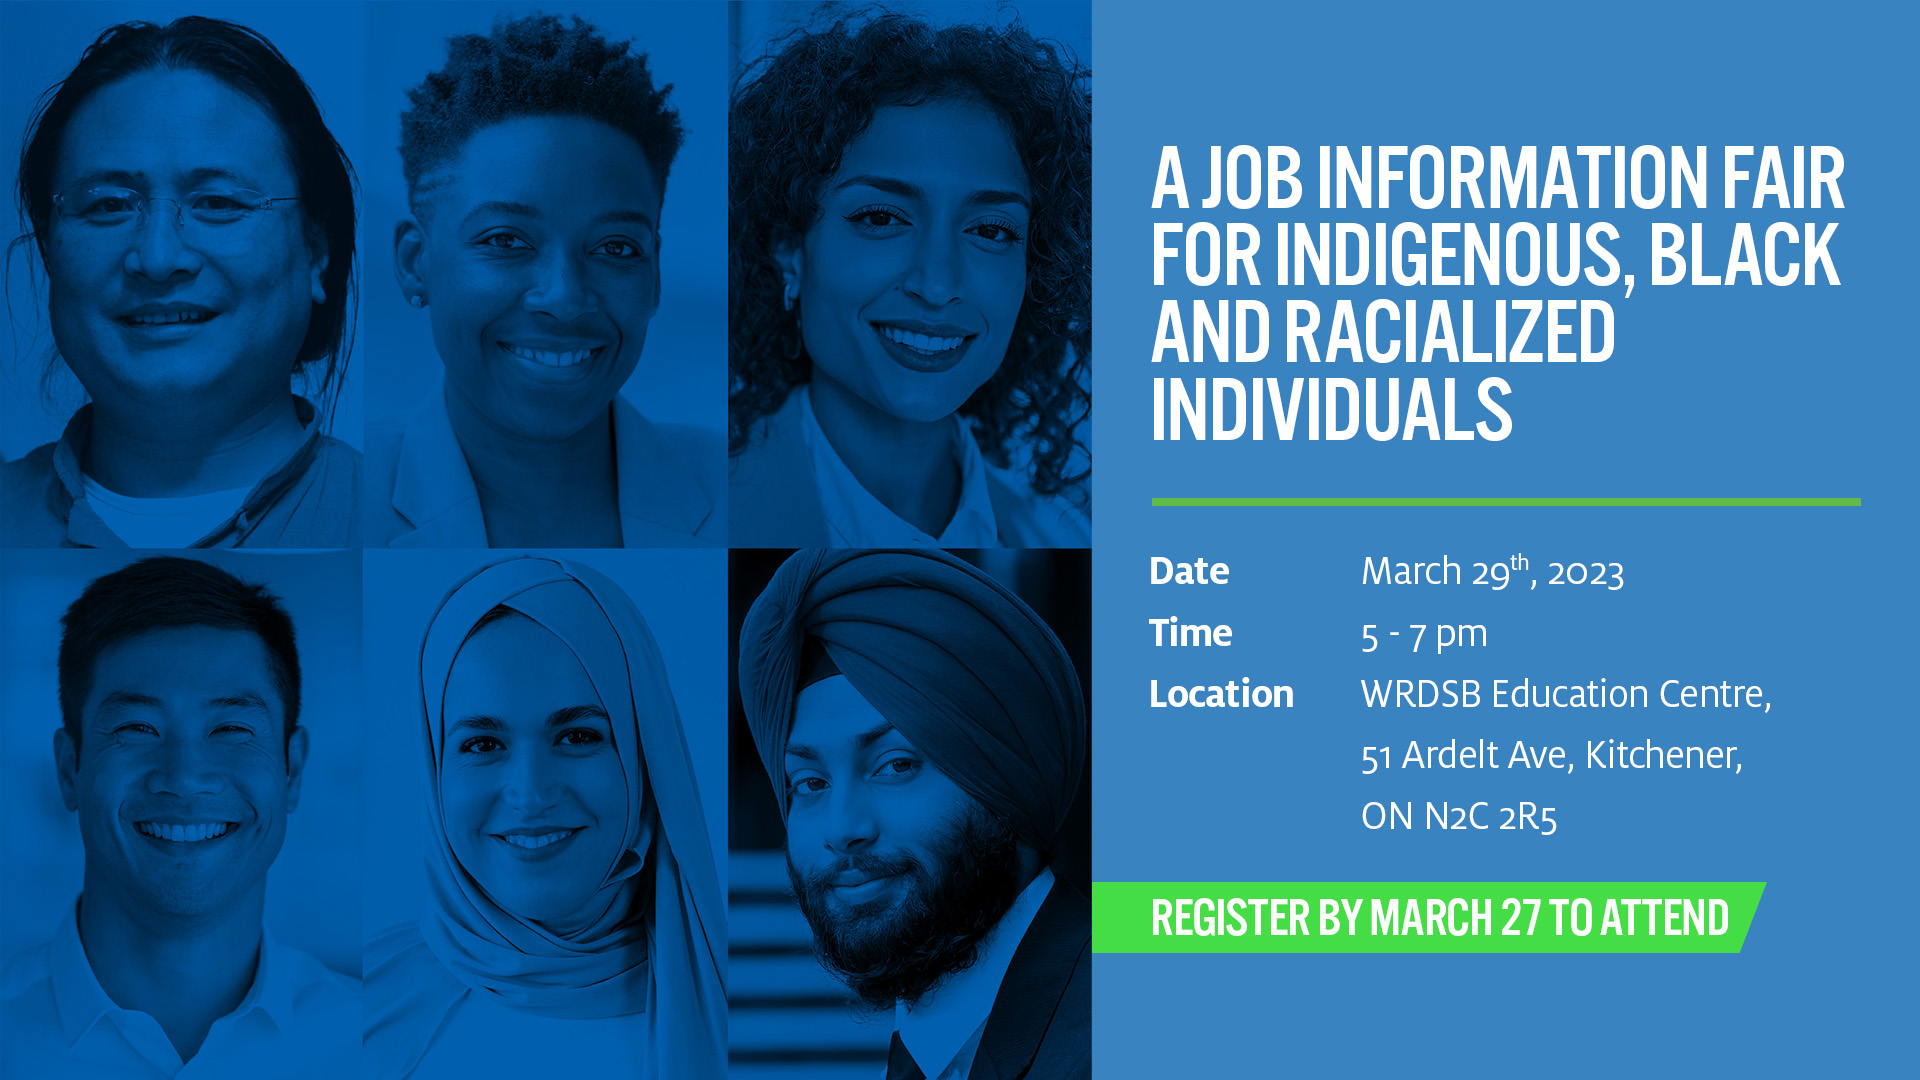 A Job Information Fair for Indigenous, Black and Racialized Individuals